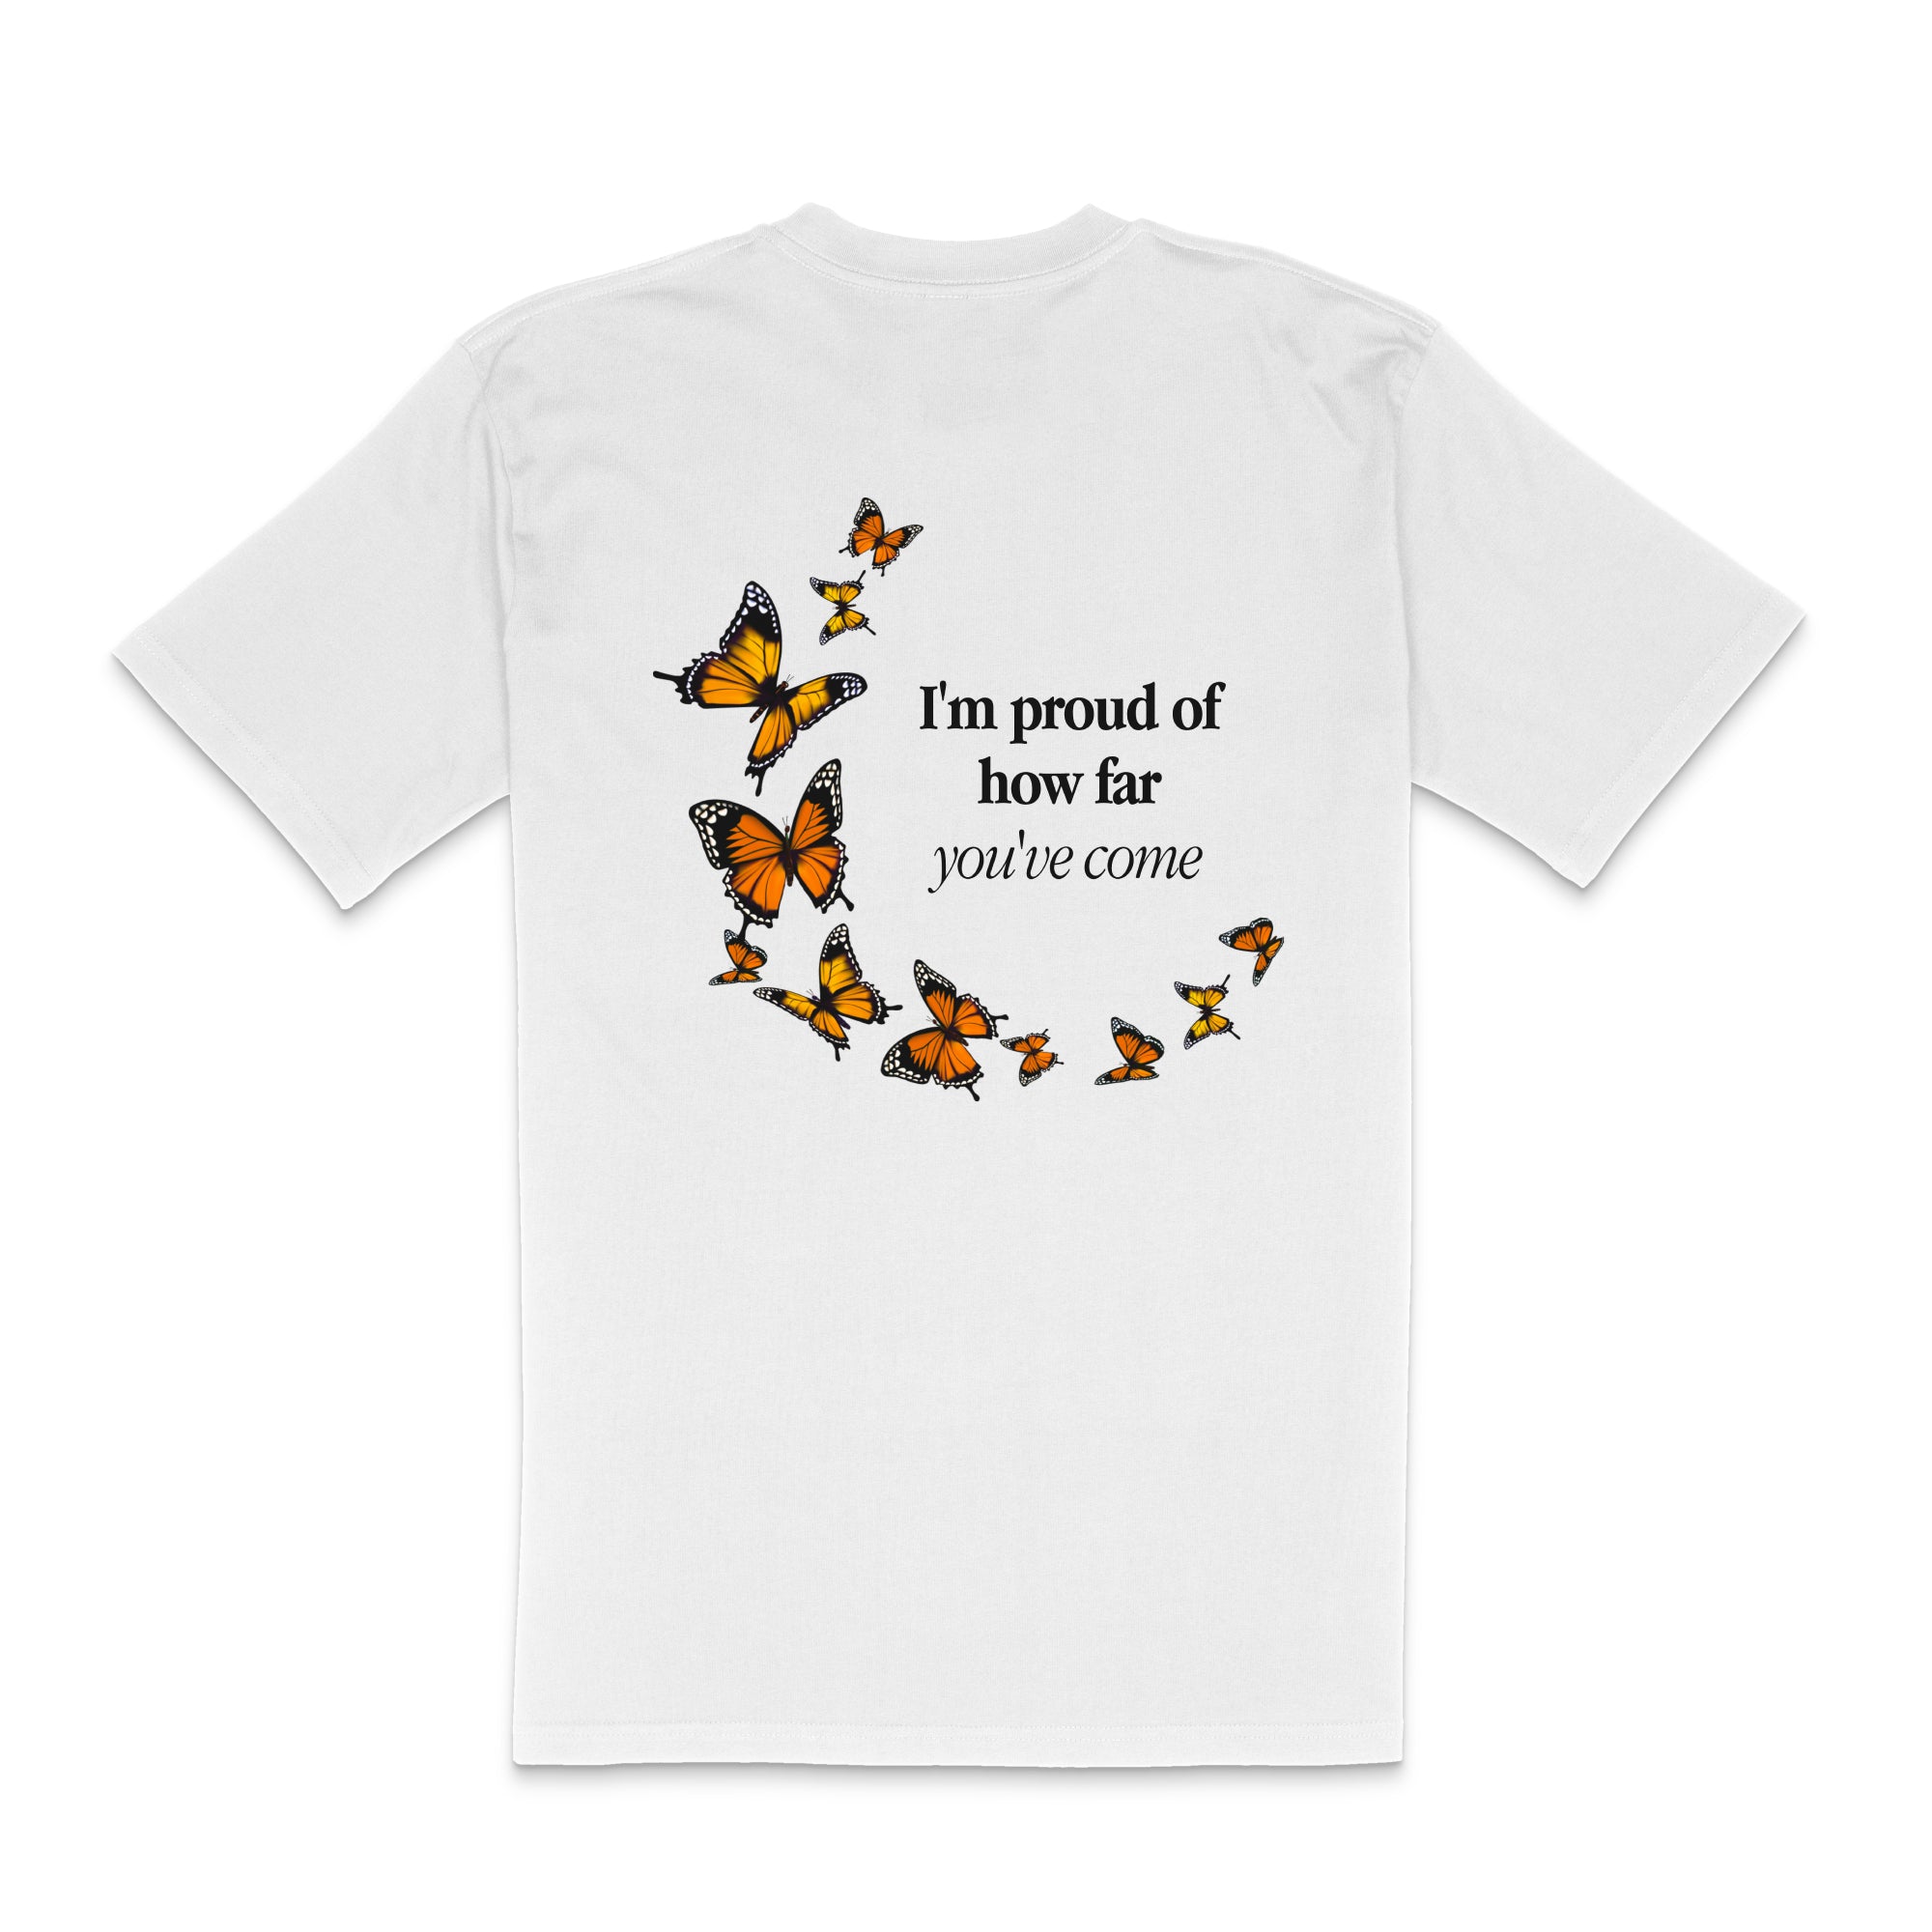 I'm proud of how far you've come T-Shirt